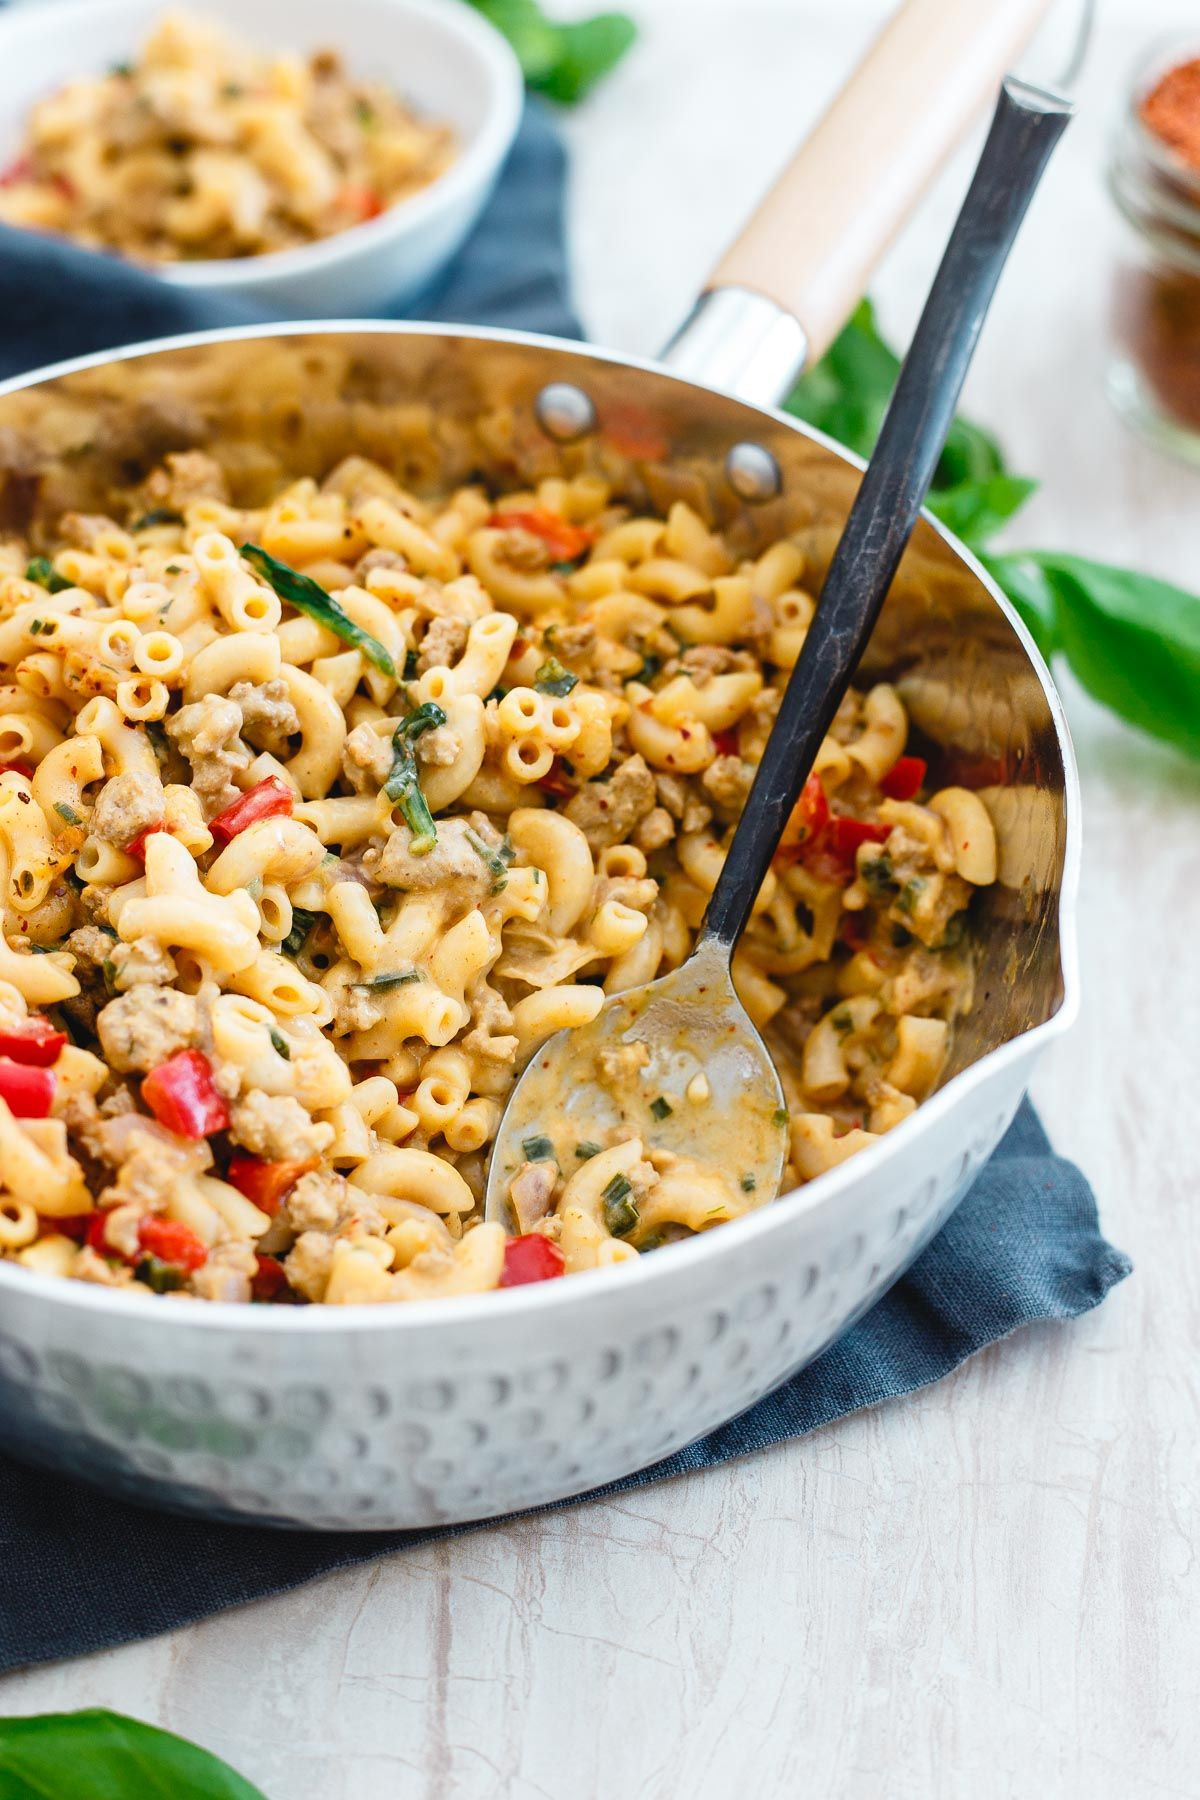 Ground Turkey Mac And Cheese
 Turkey skillet mac and cheese is creamy and decadent